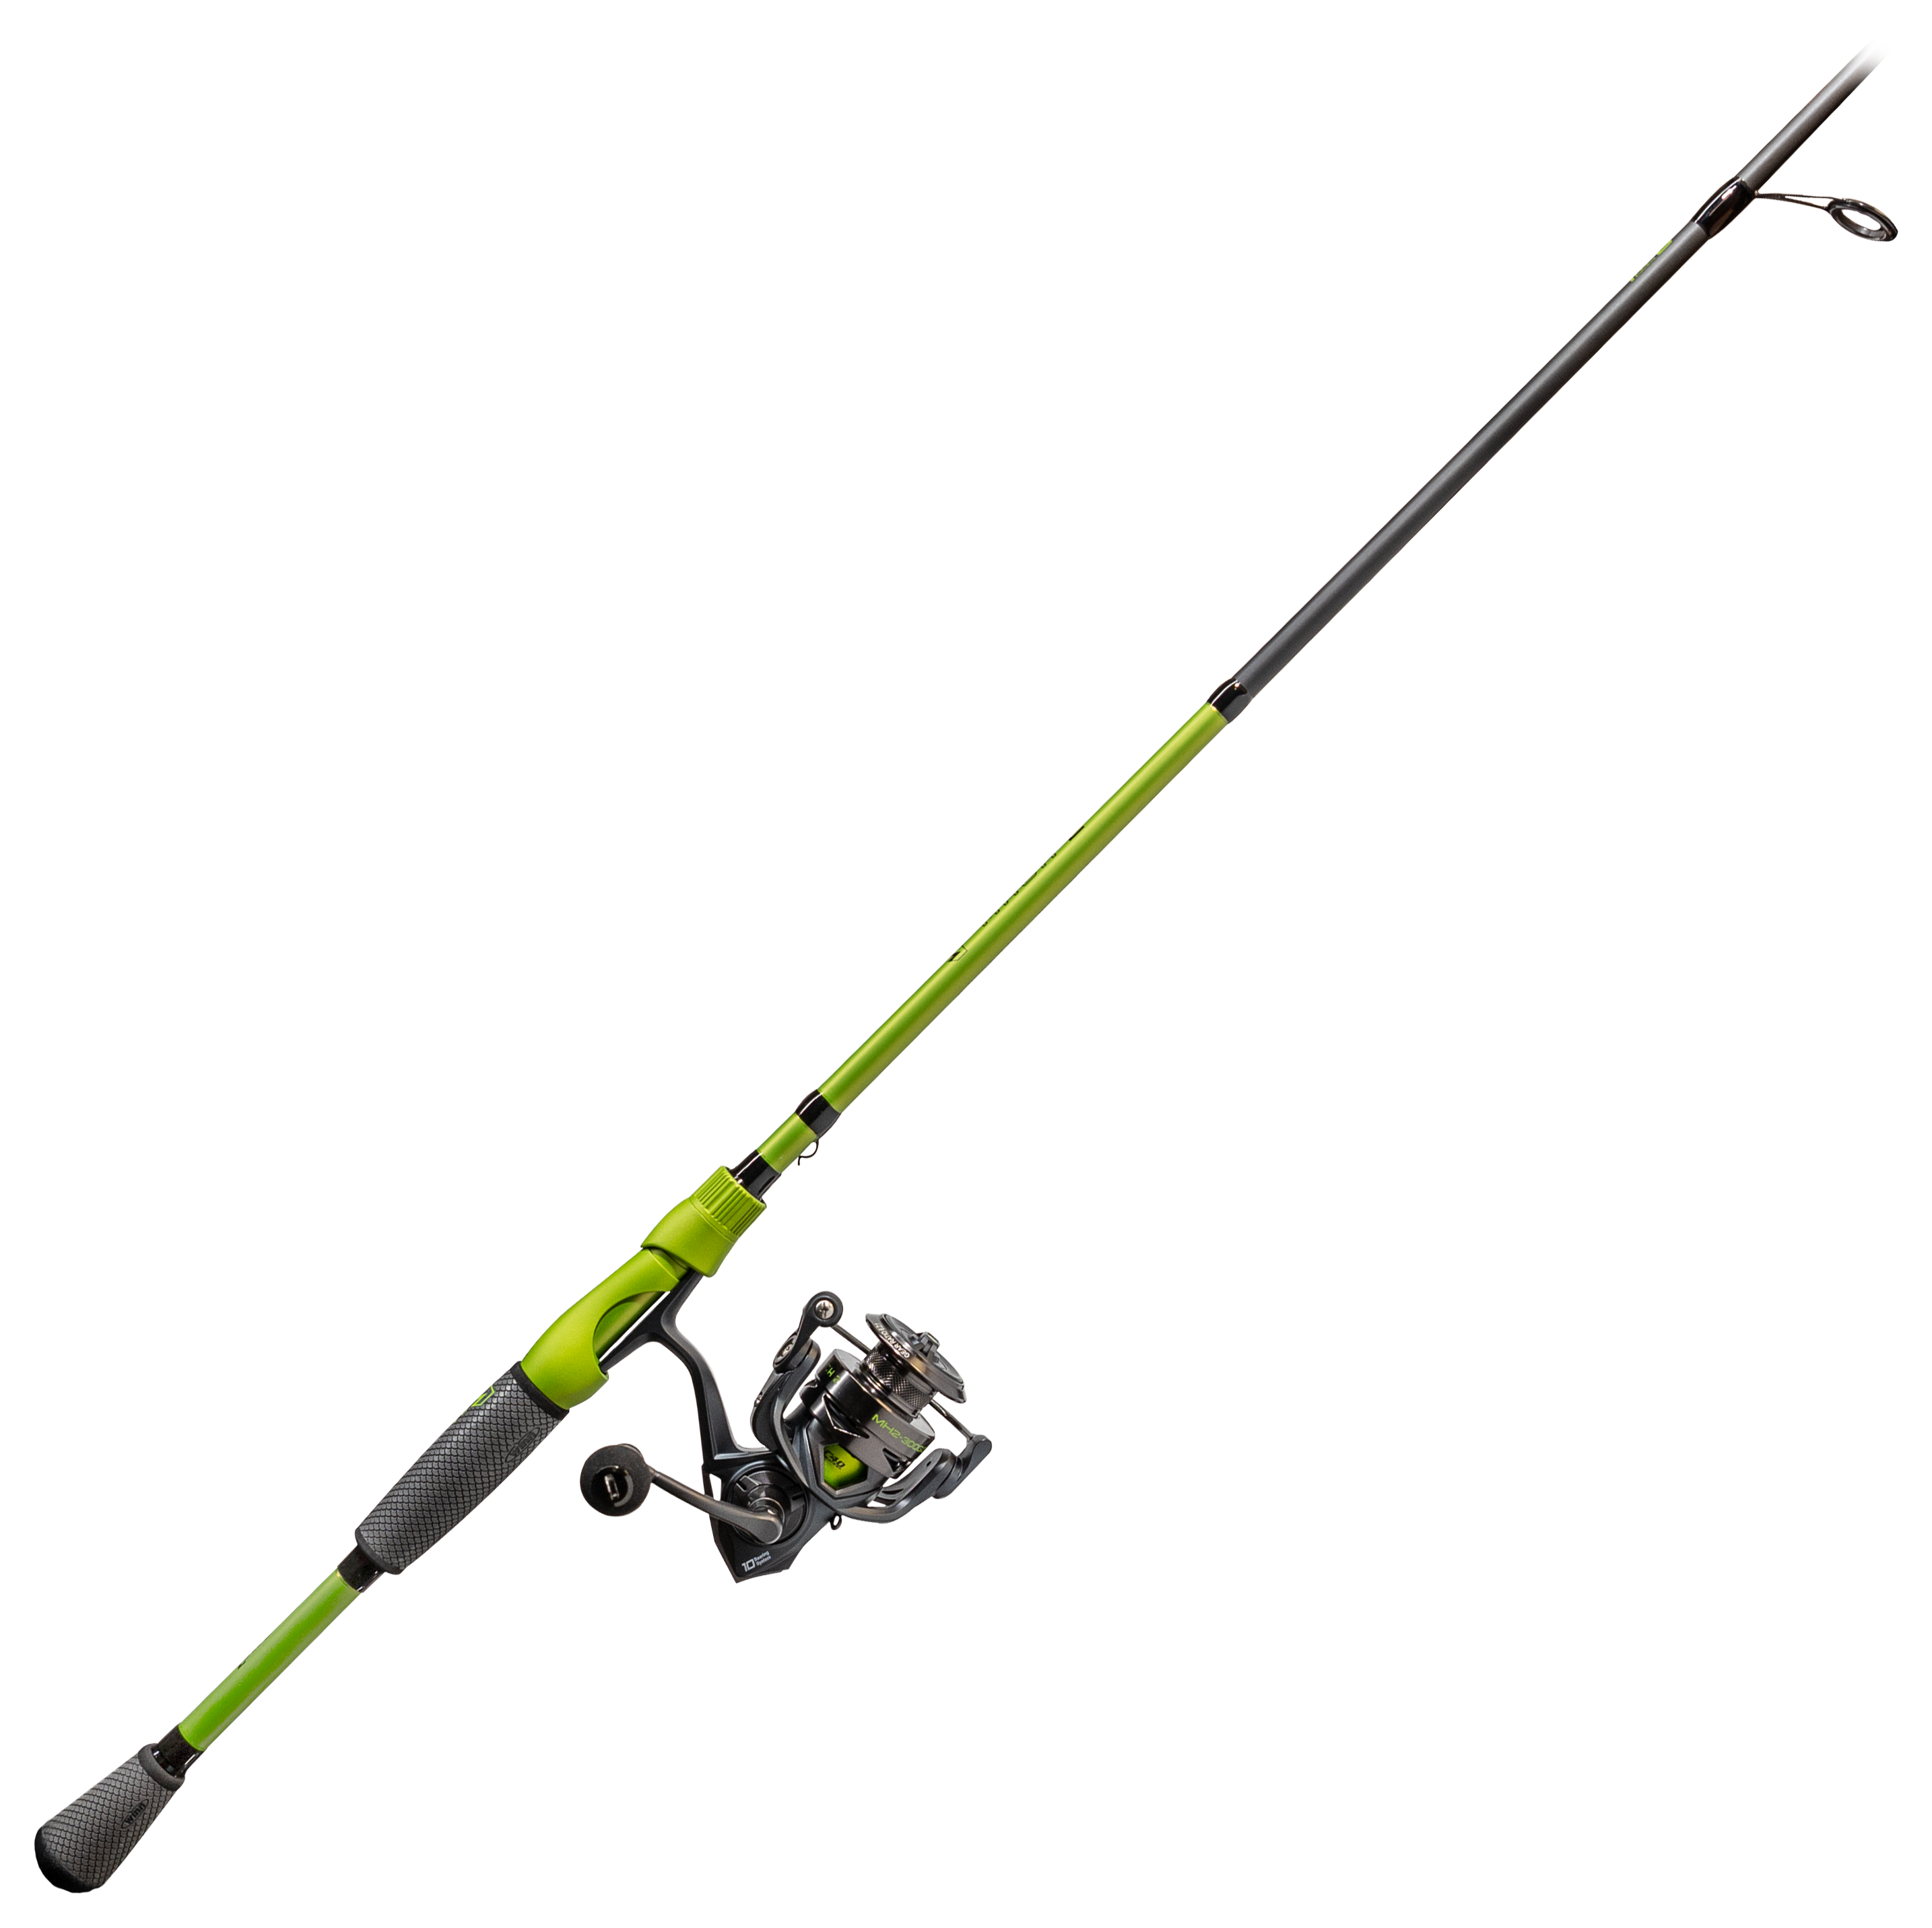 LEW'S Mach 2 Spin 30 6'9-1 Medium Fast Spinning Combo, Multi, One